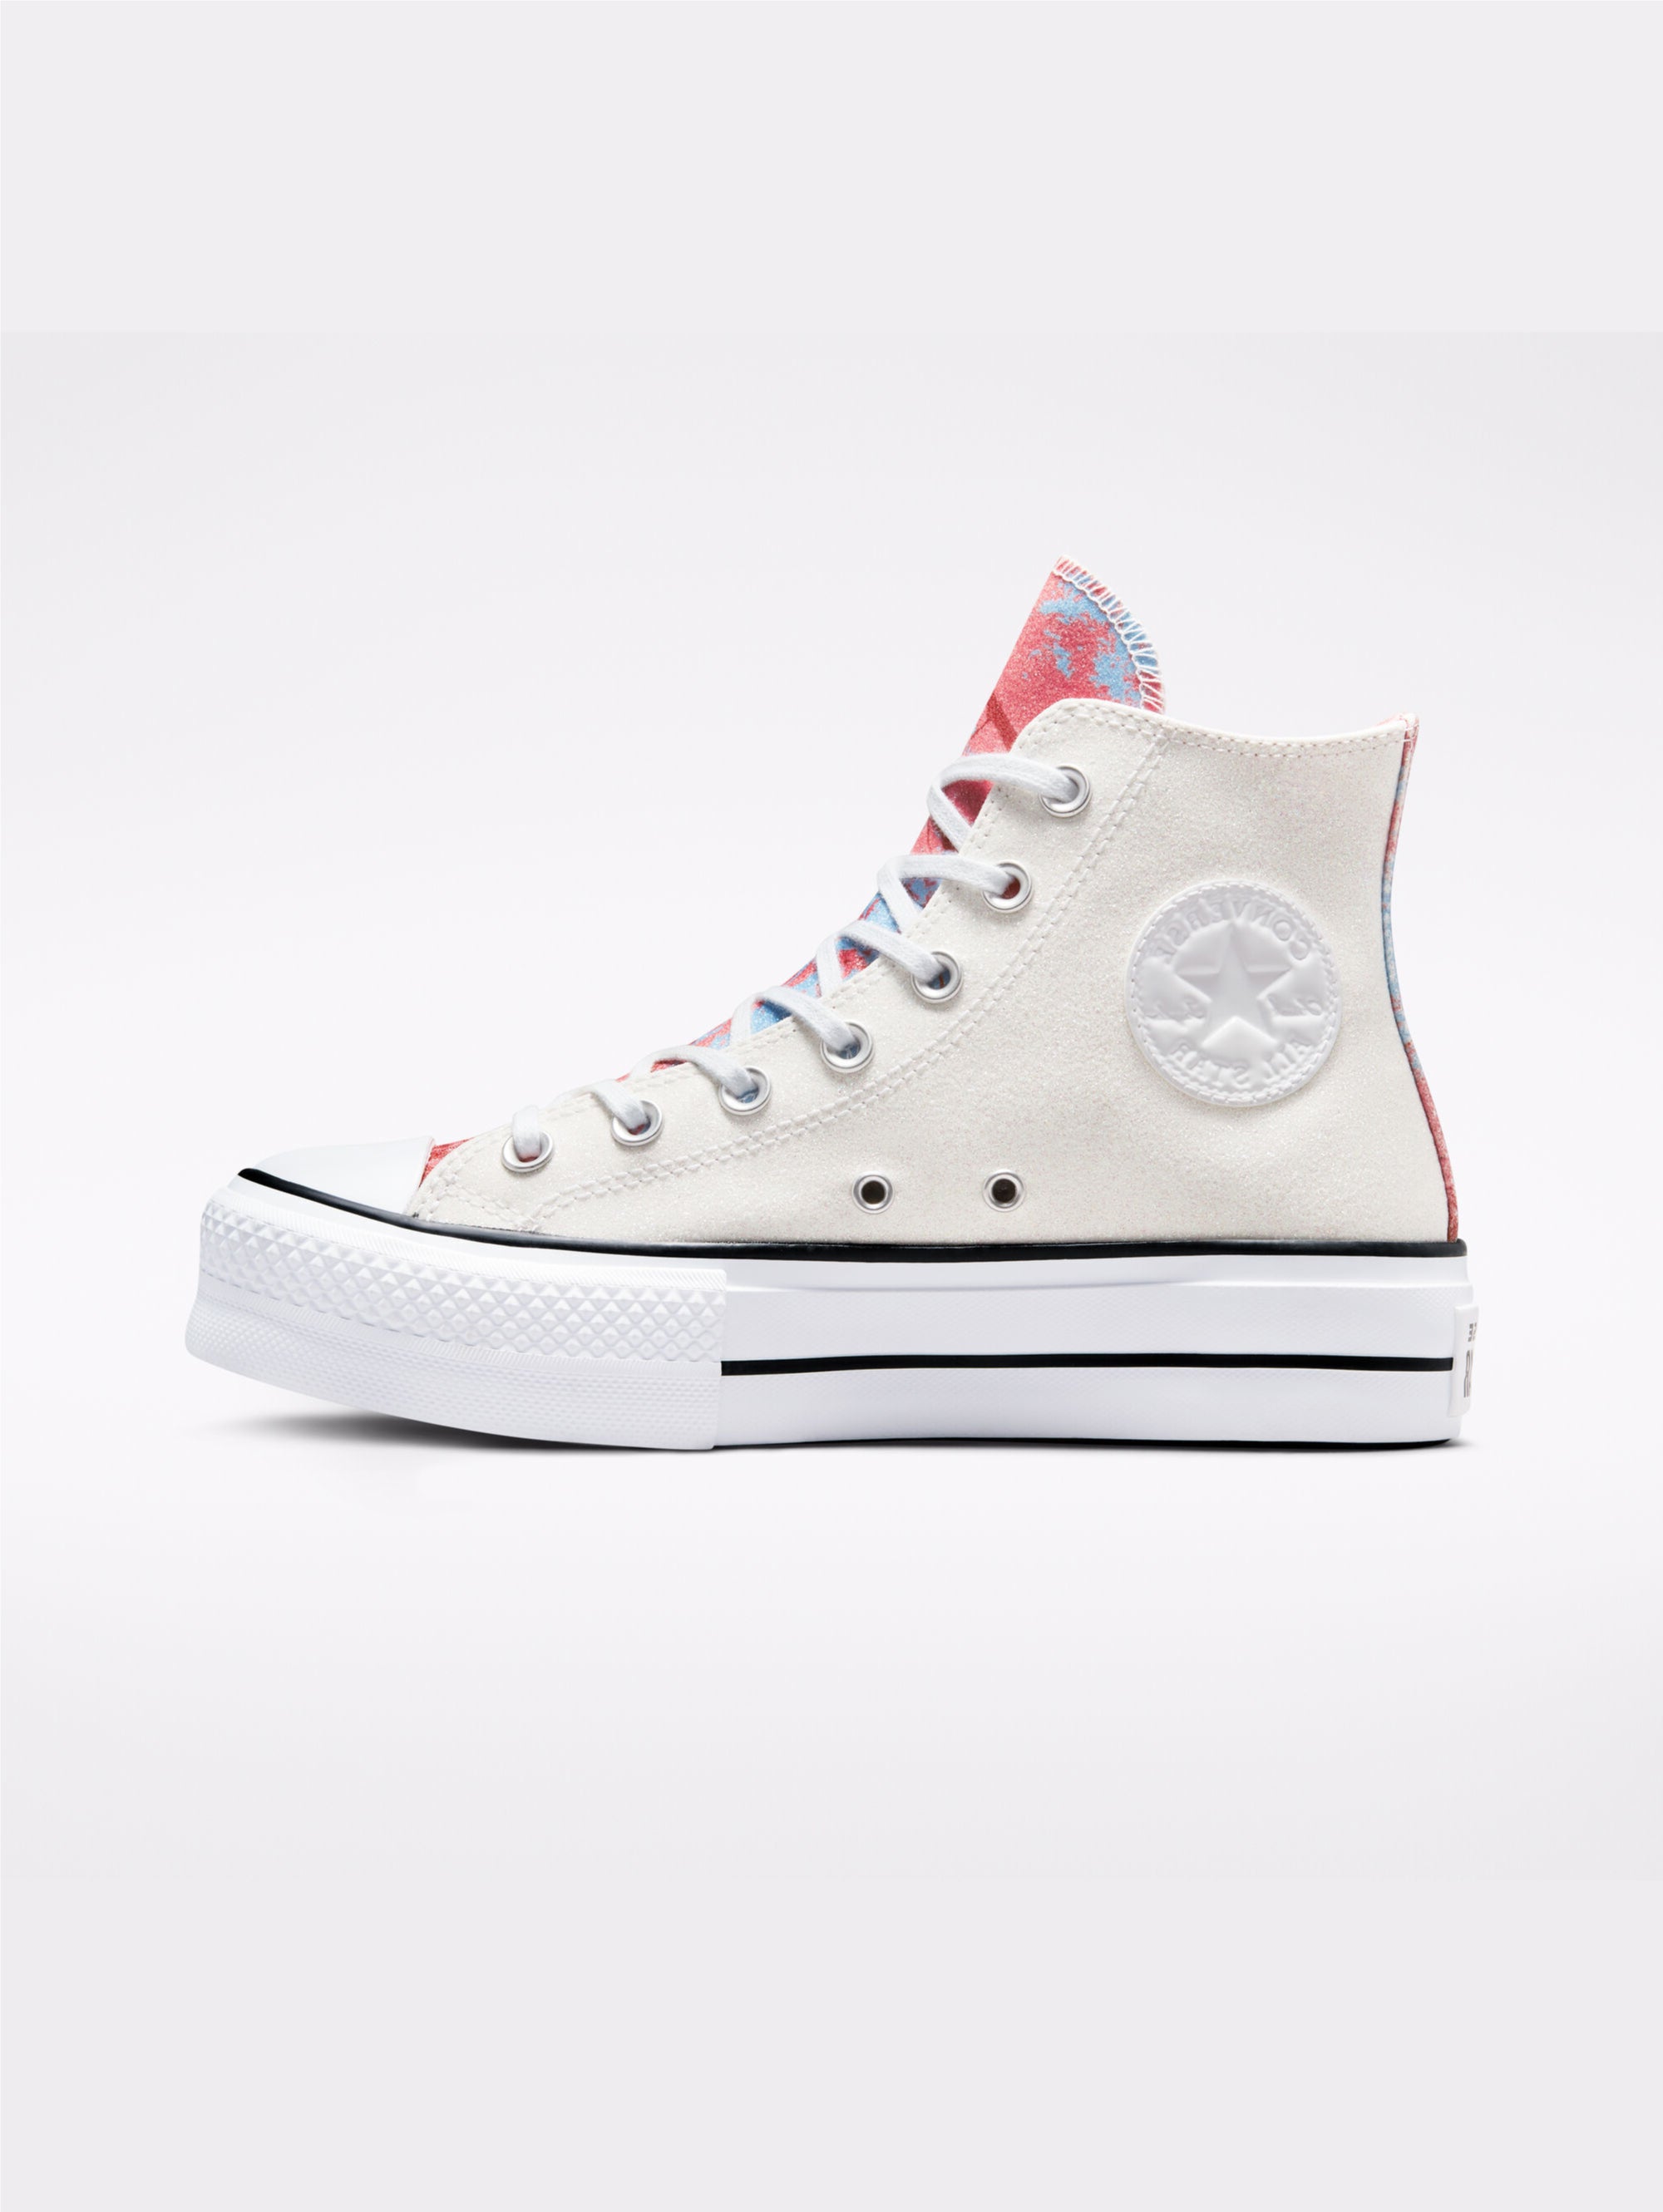 CONVERSE-Sneakers Alte Platform Glitter White pink-TRYME Shop